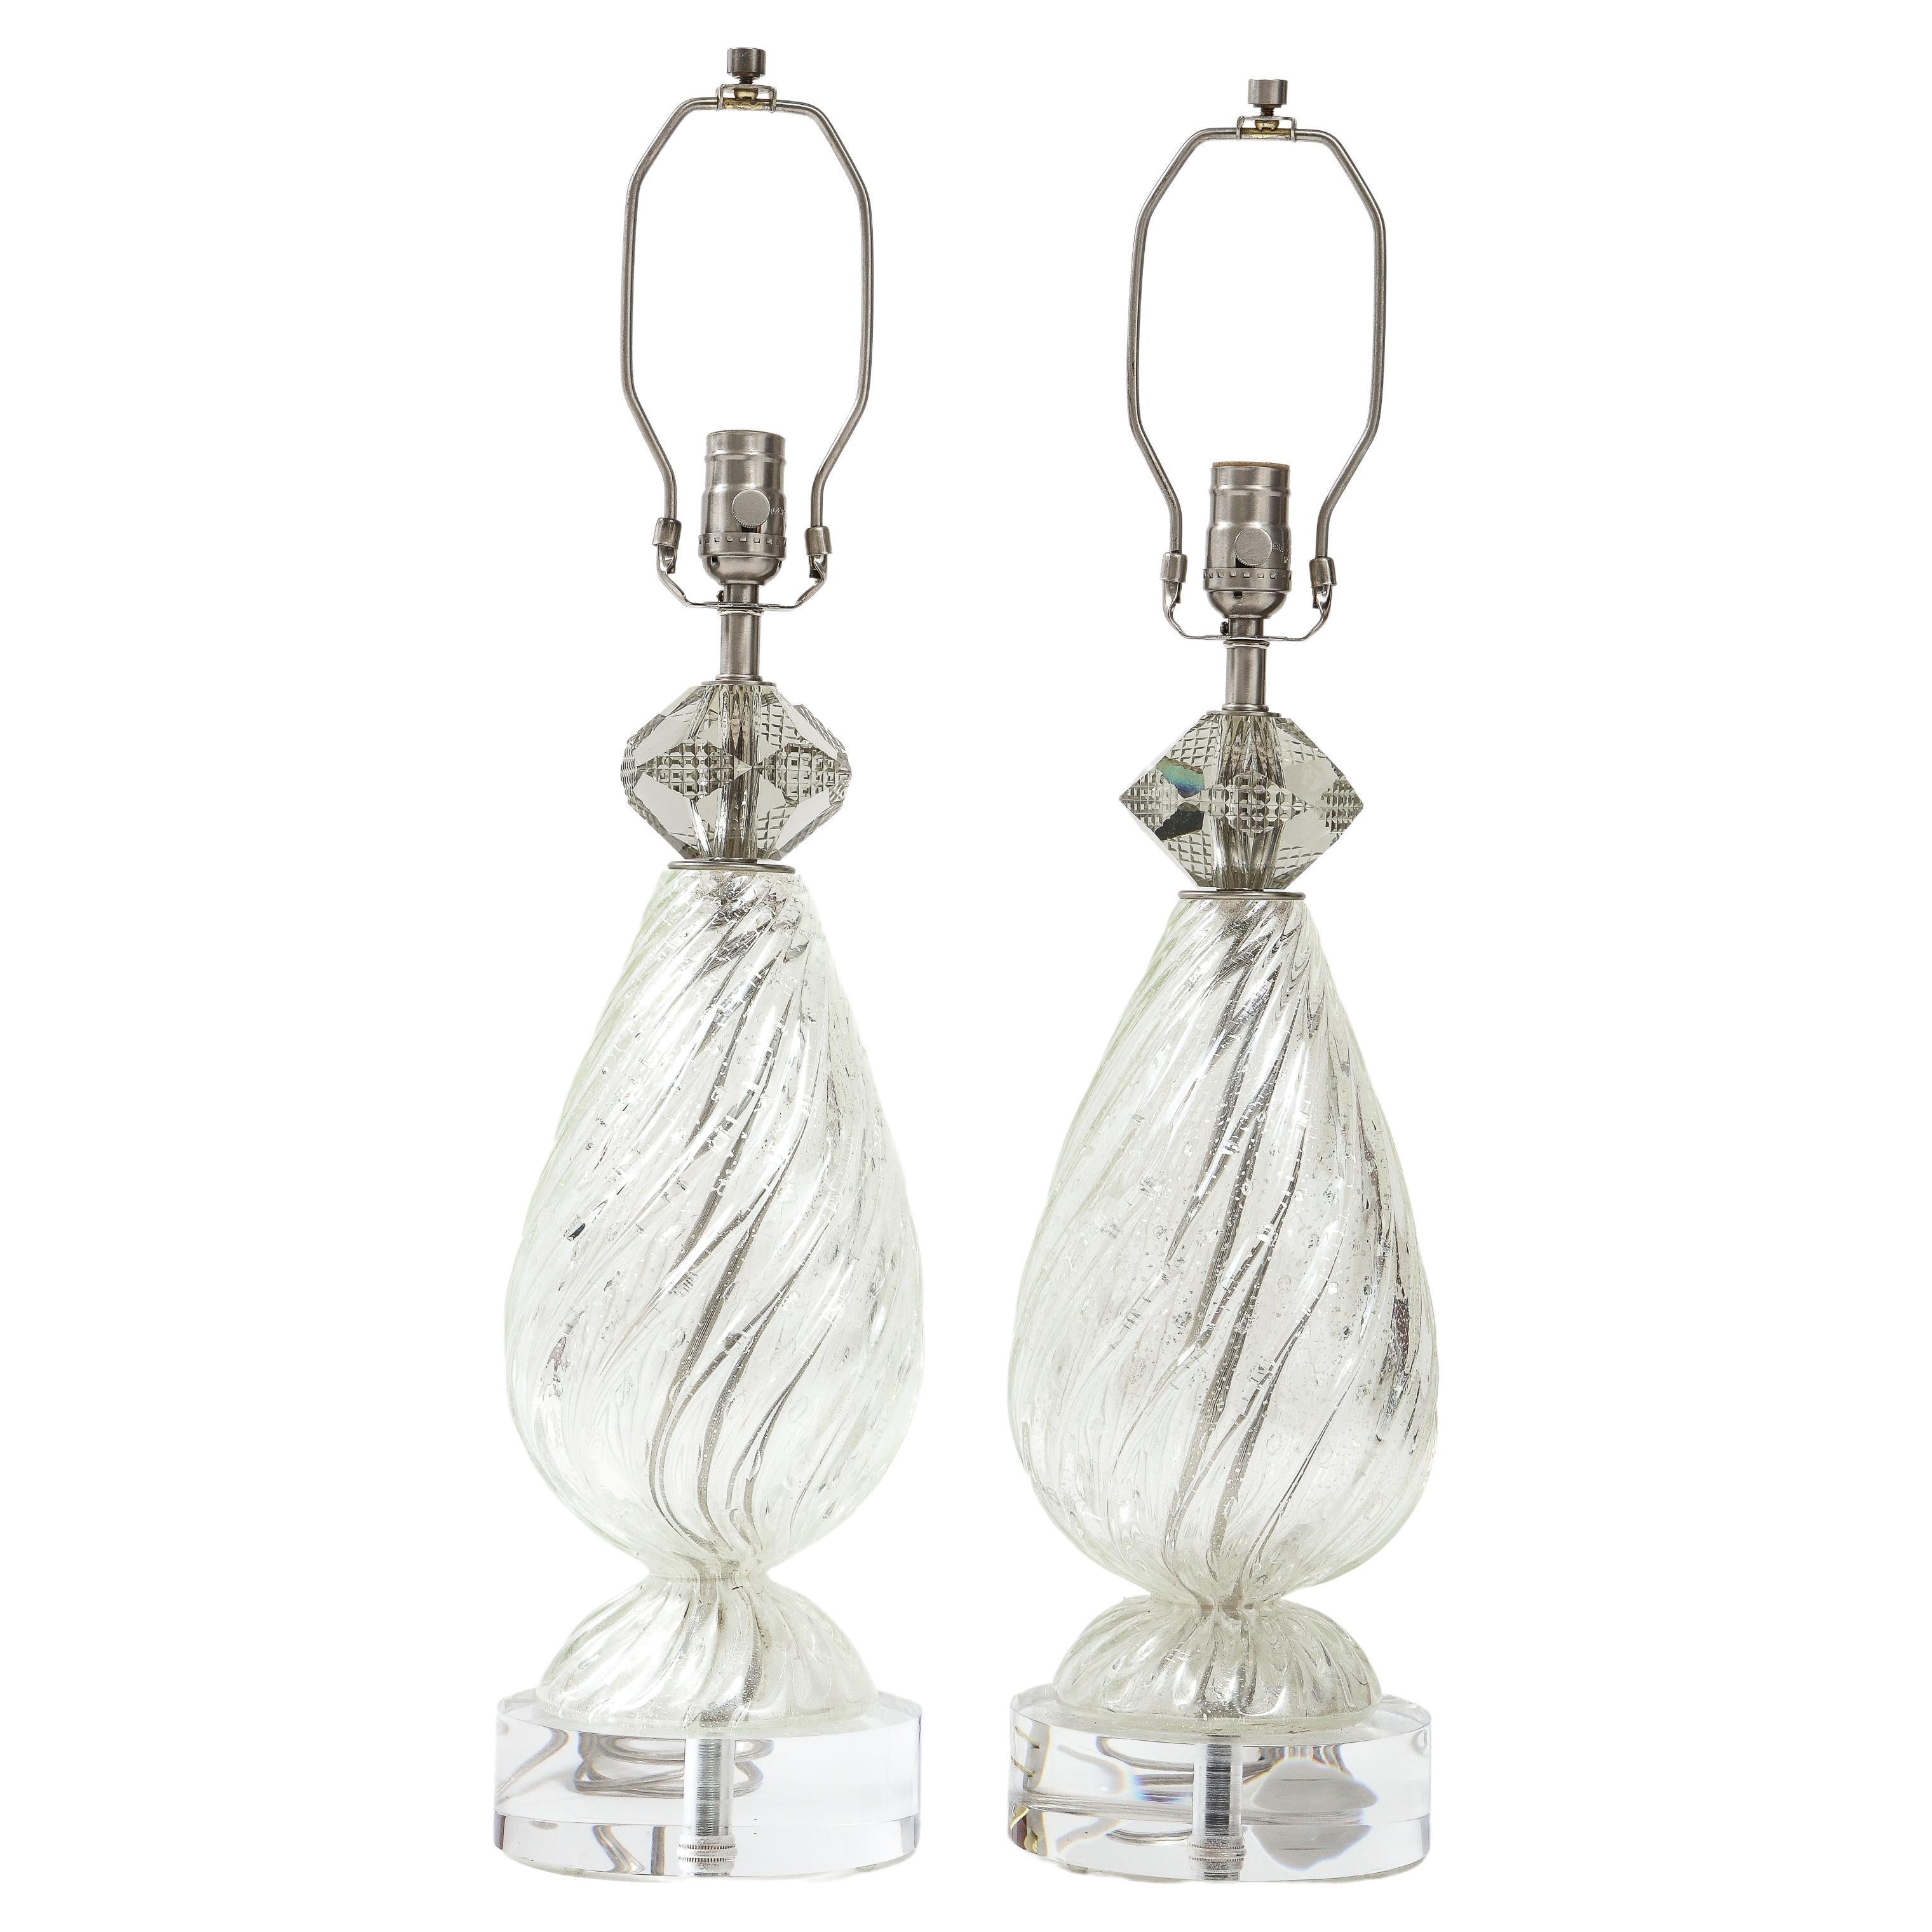 Barovier Clear/Silver Murano Glass Lamps